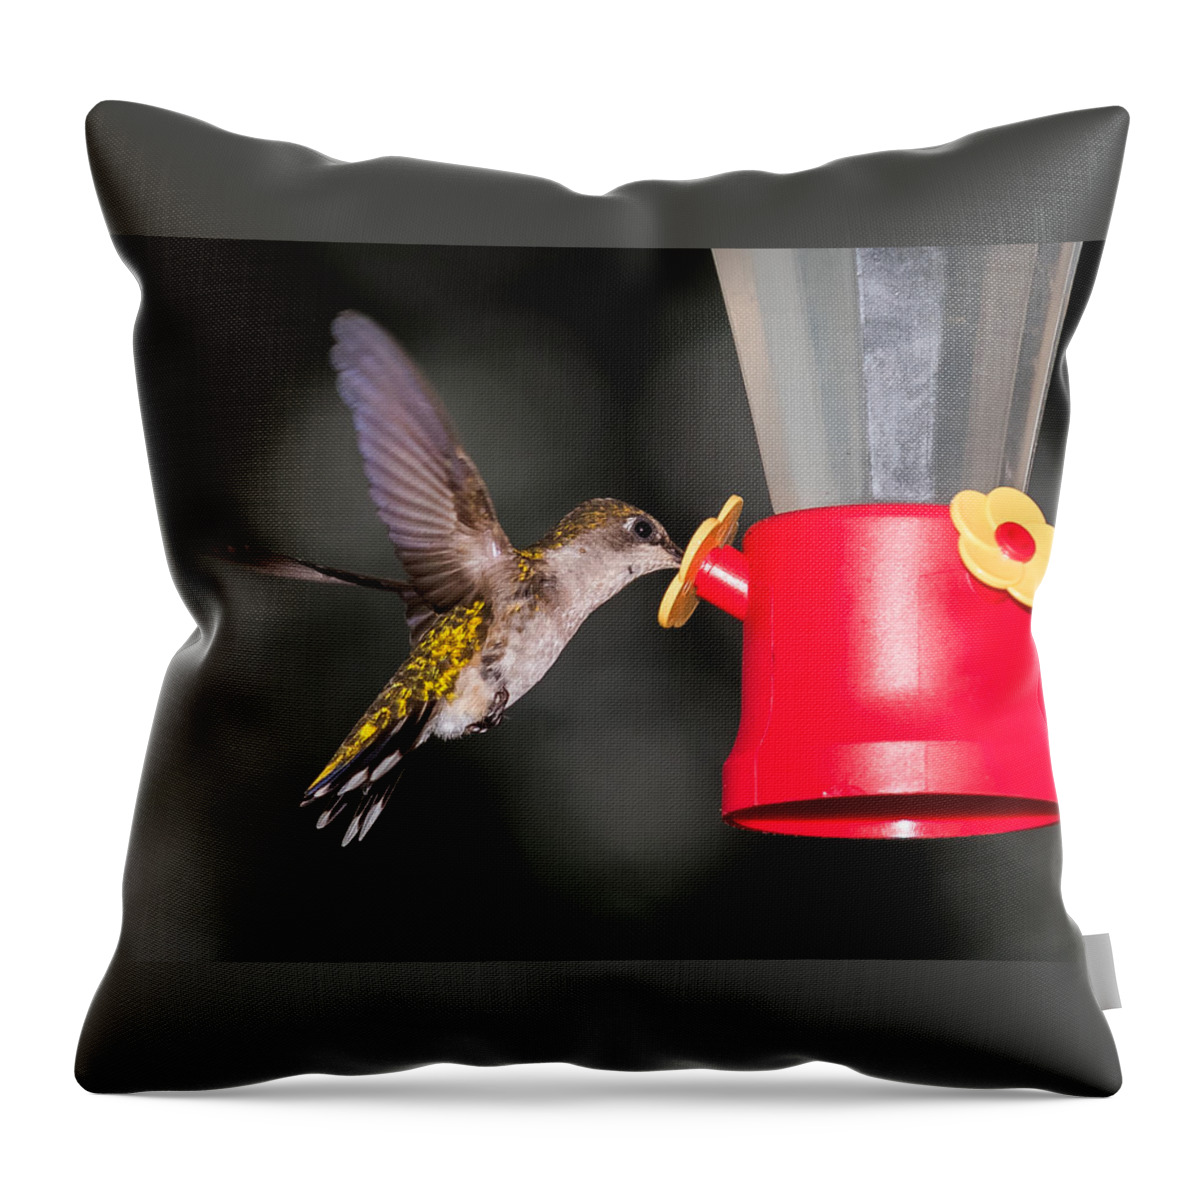 Hummingbird Throw Pillow featuring the photograph Hummingbird Gets A Drink by Holden The Moment